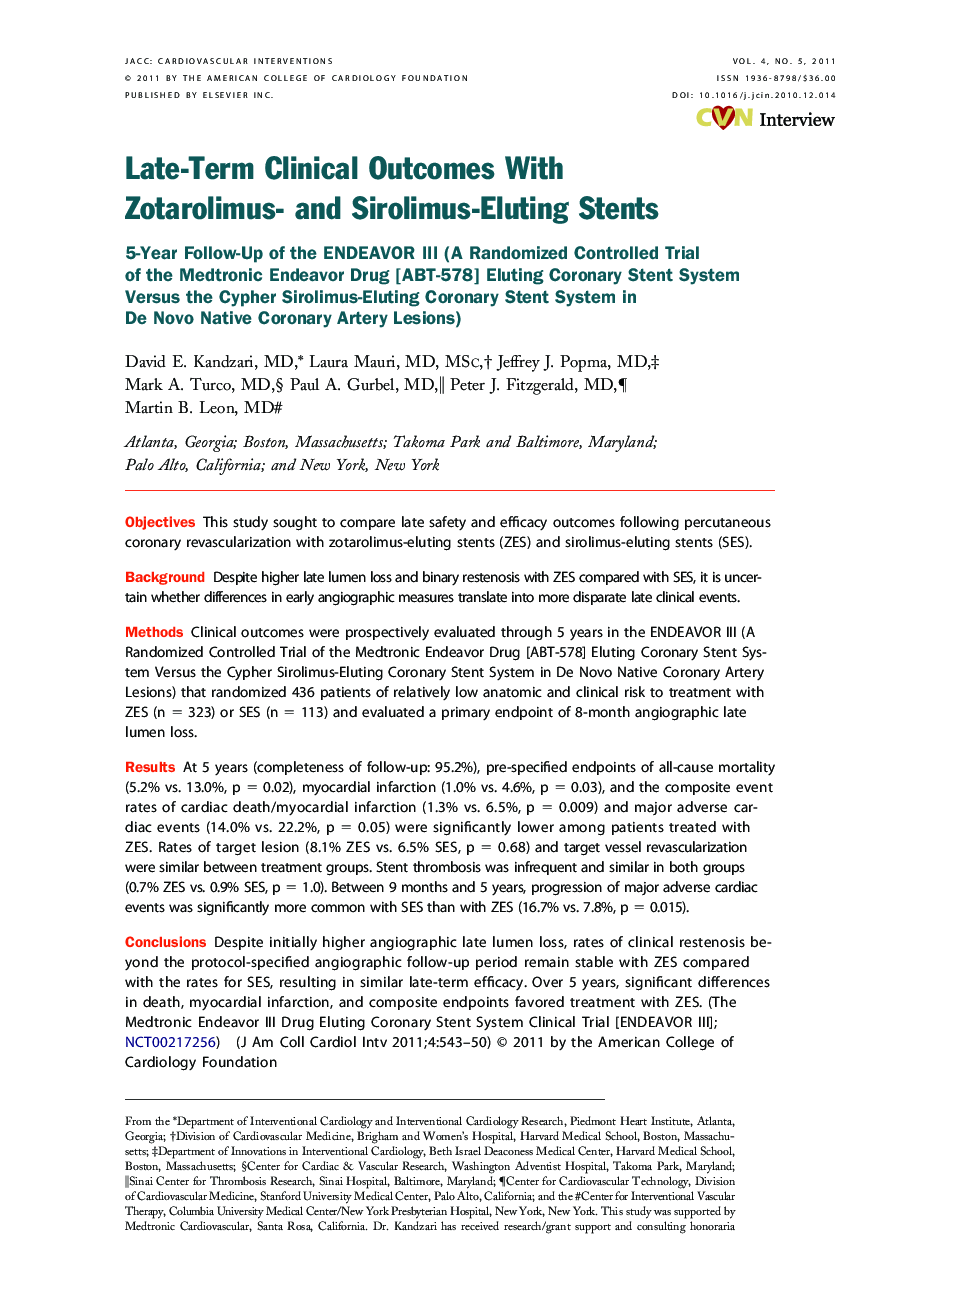 Late-Term Clinical Outcomes With Zotarolimus- and Sirolimus-Eluting Stents : 5-Year Follow-Up of the ENDEAVOR III (A Randomized Controlled Trial of the Medtronic Endeavor Drug [ABT-578] Eluting Coronary Stent System Versus the Cypher Sirolimus-Eluting Cor